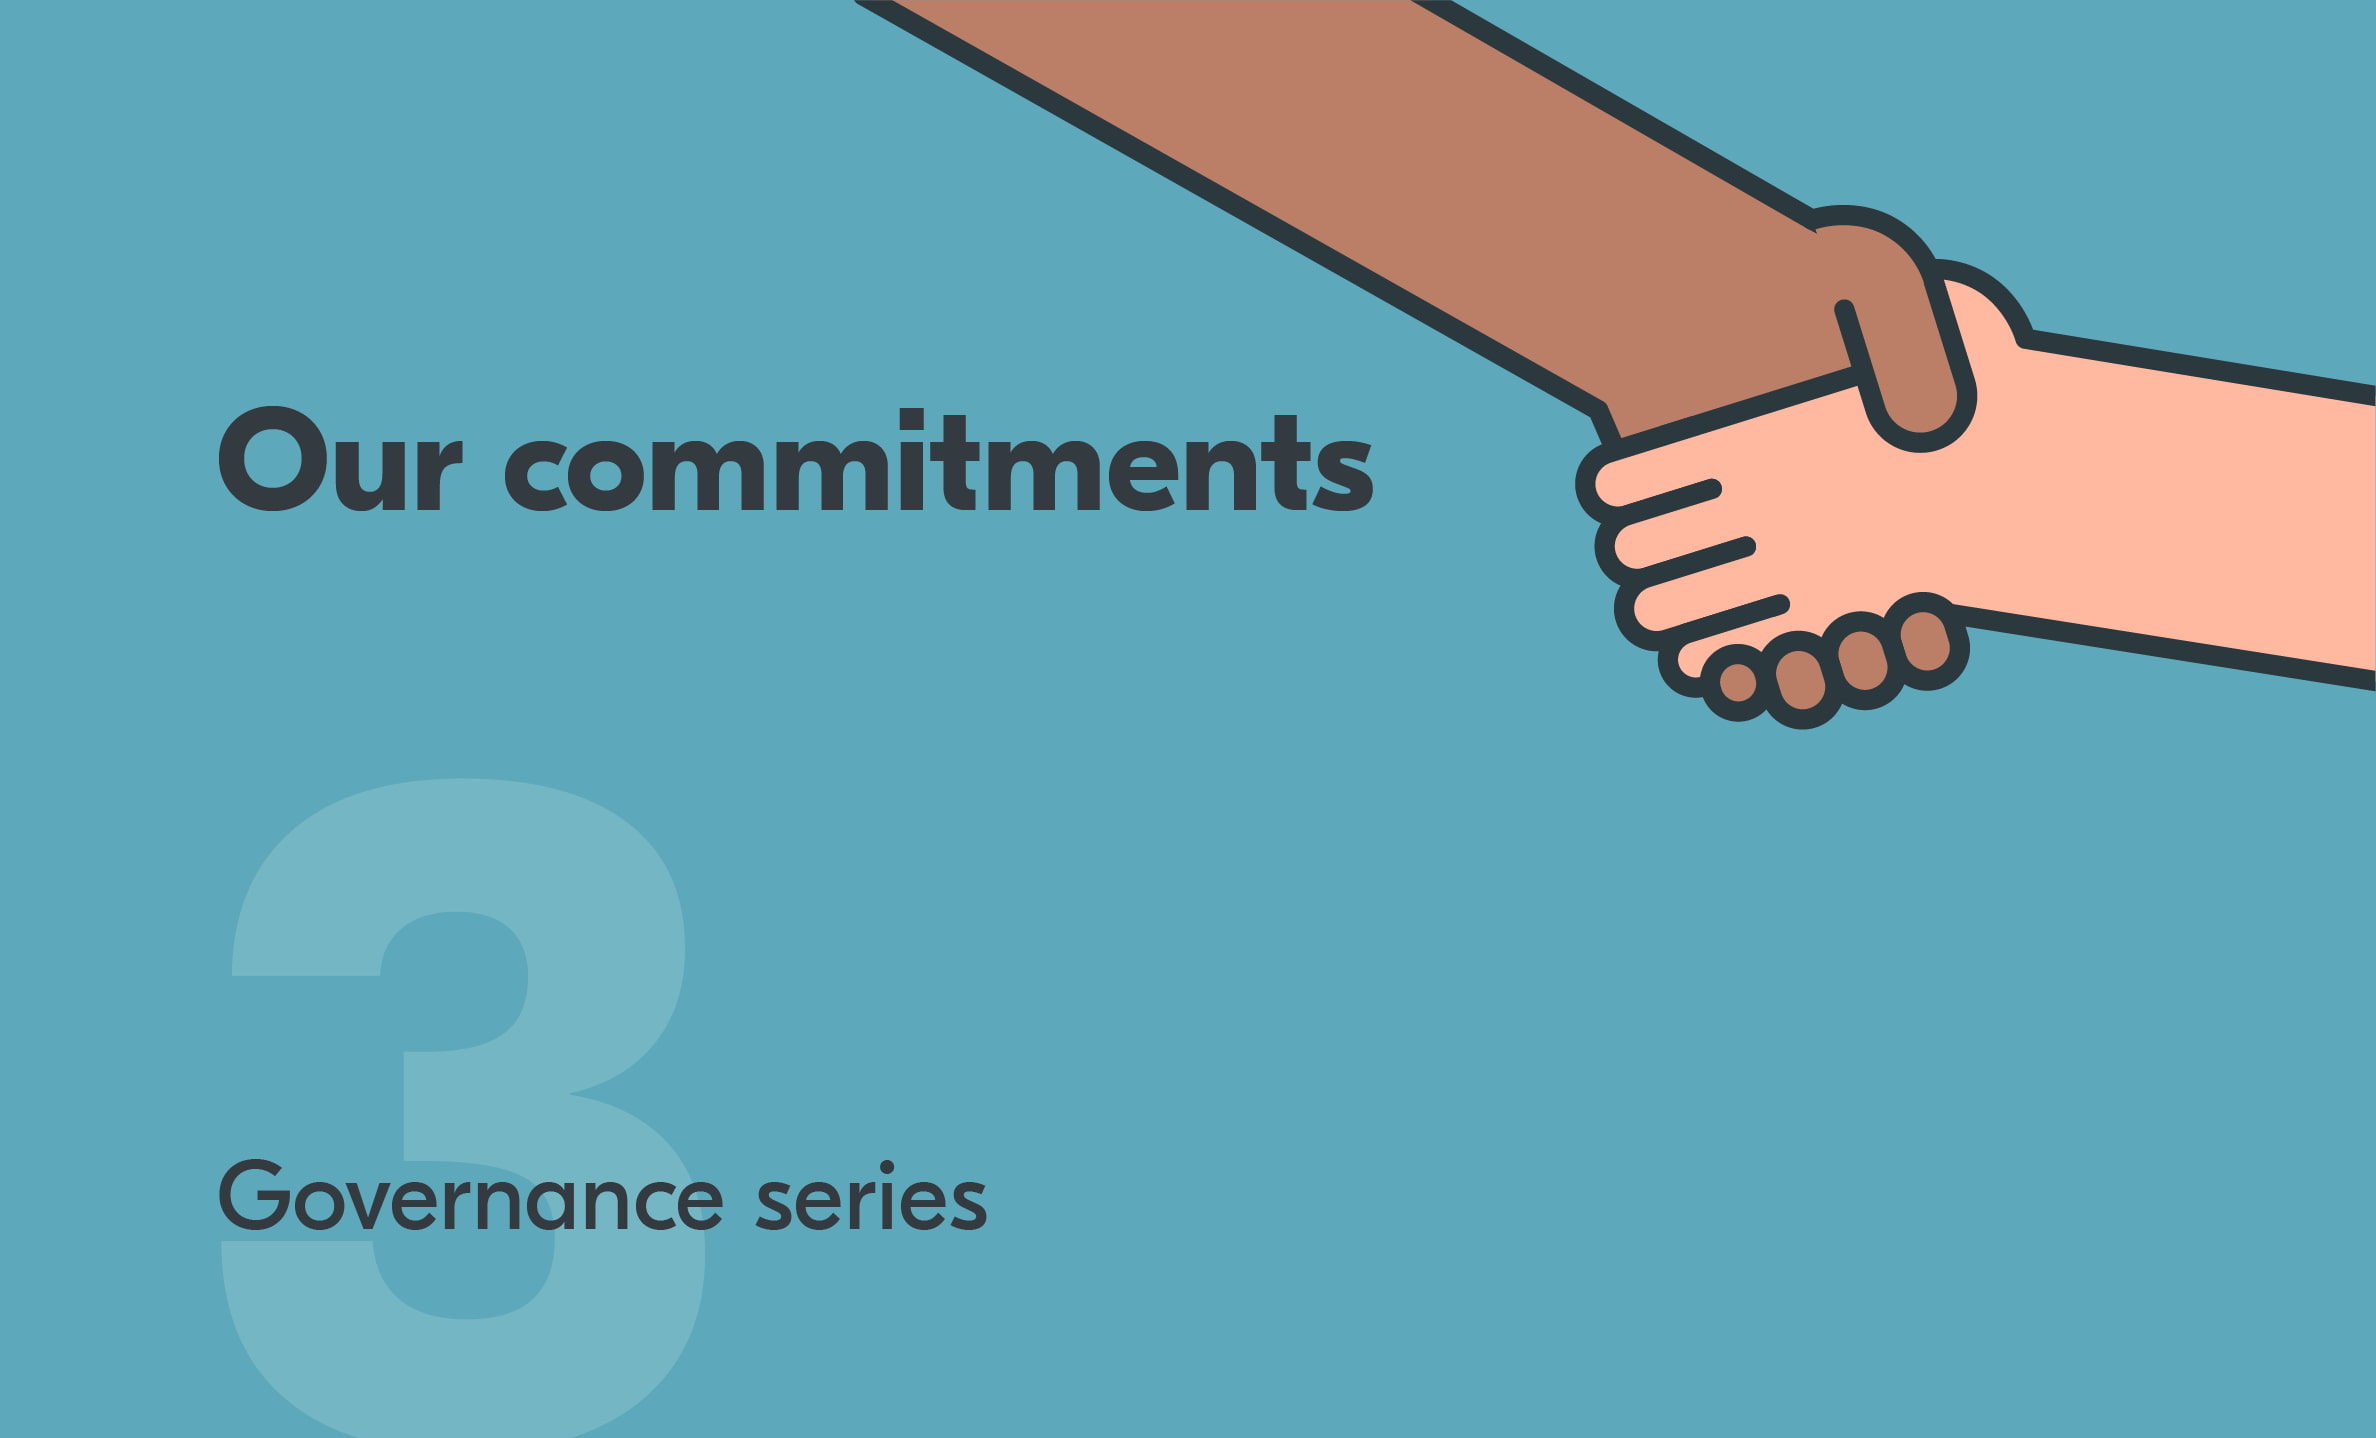 Hand shake graphic with text: Governance series 3: Our commitments